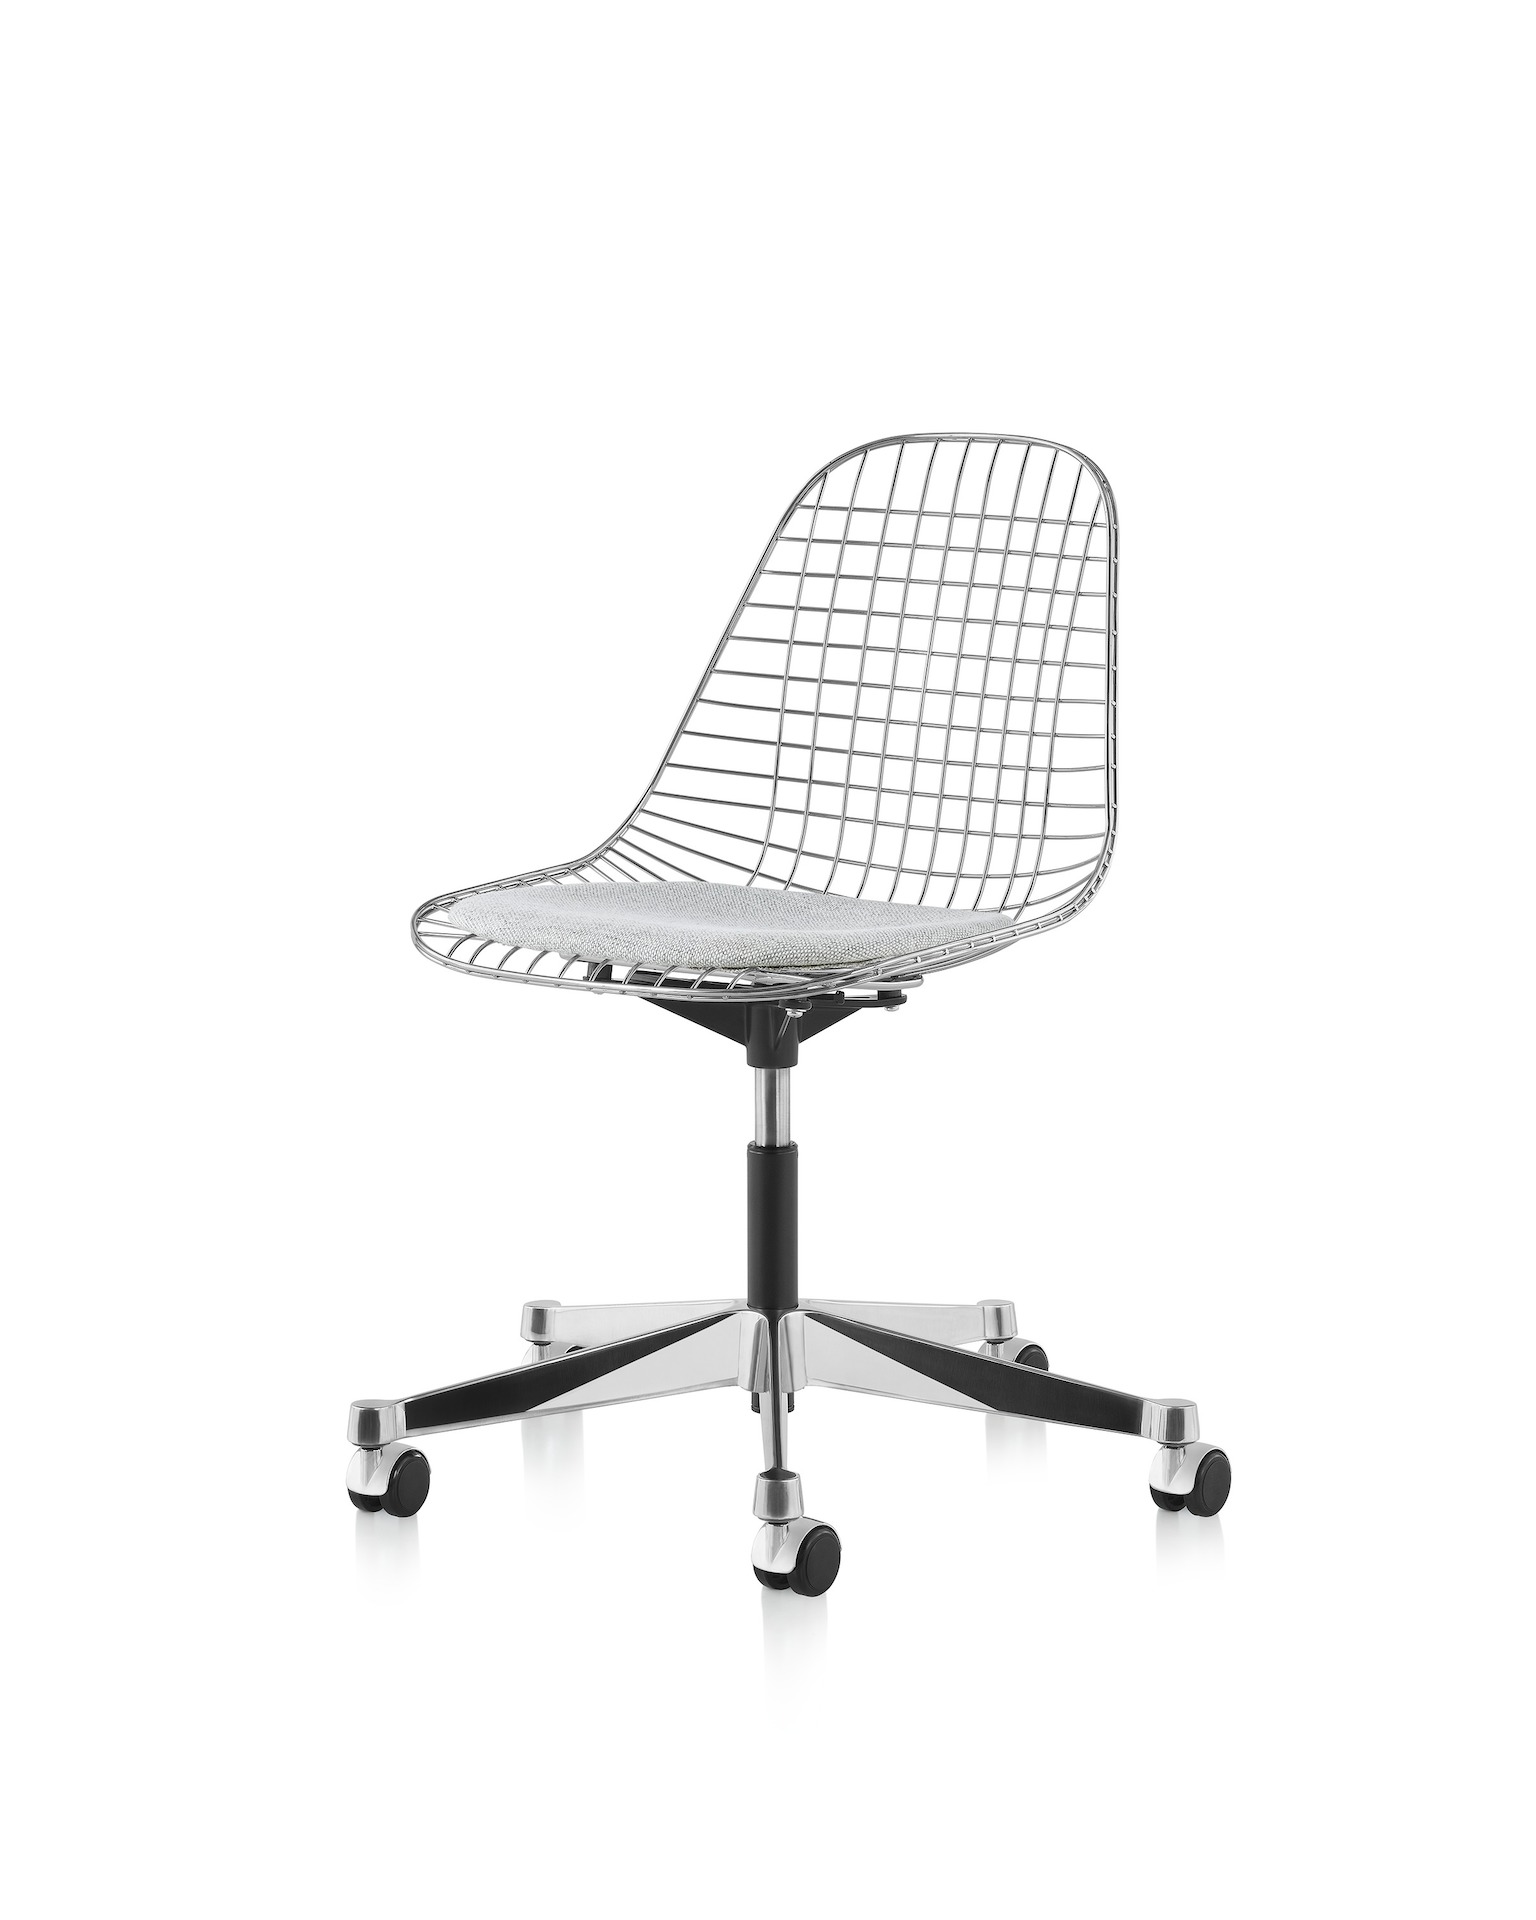 An Eames Wire Chair featuring a light gray seat textile, a five star base and casters. Viewed from the front at angle. 